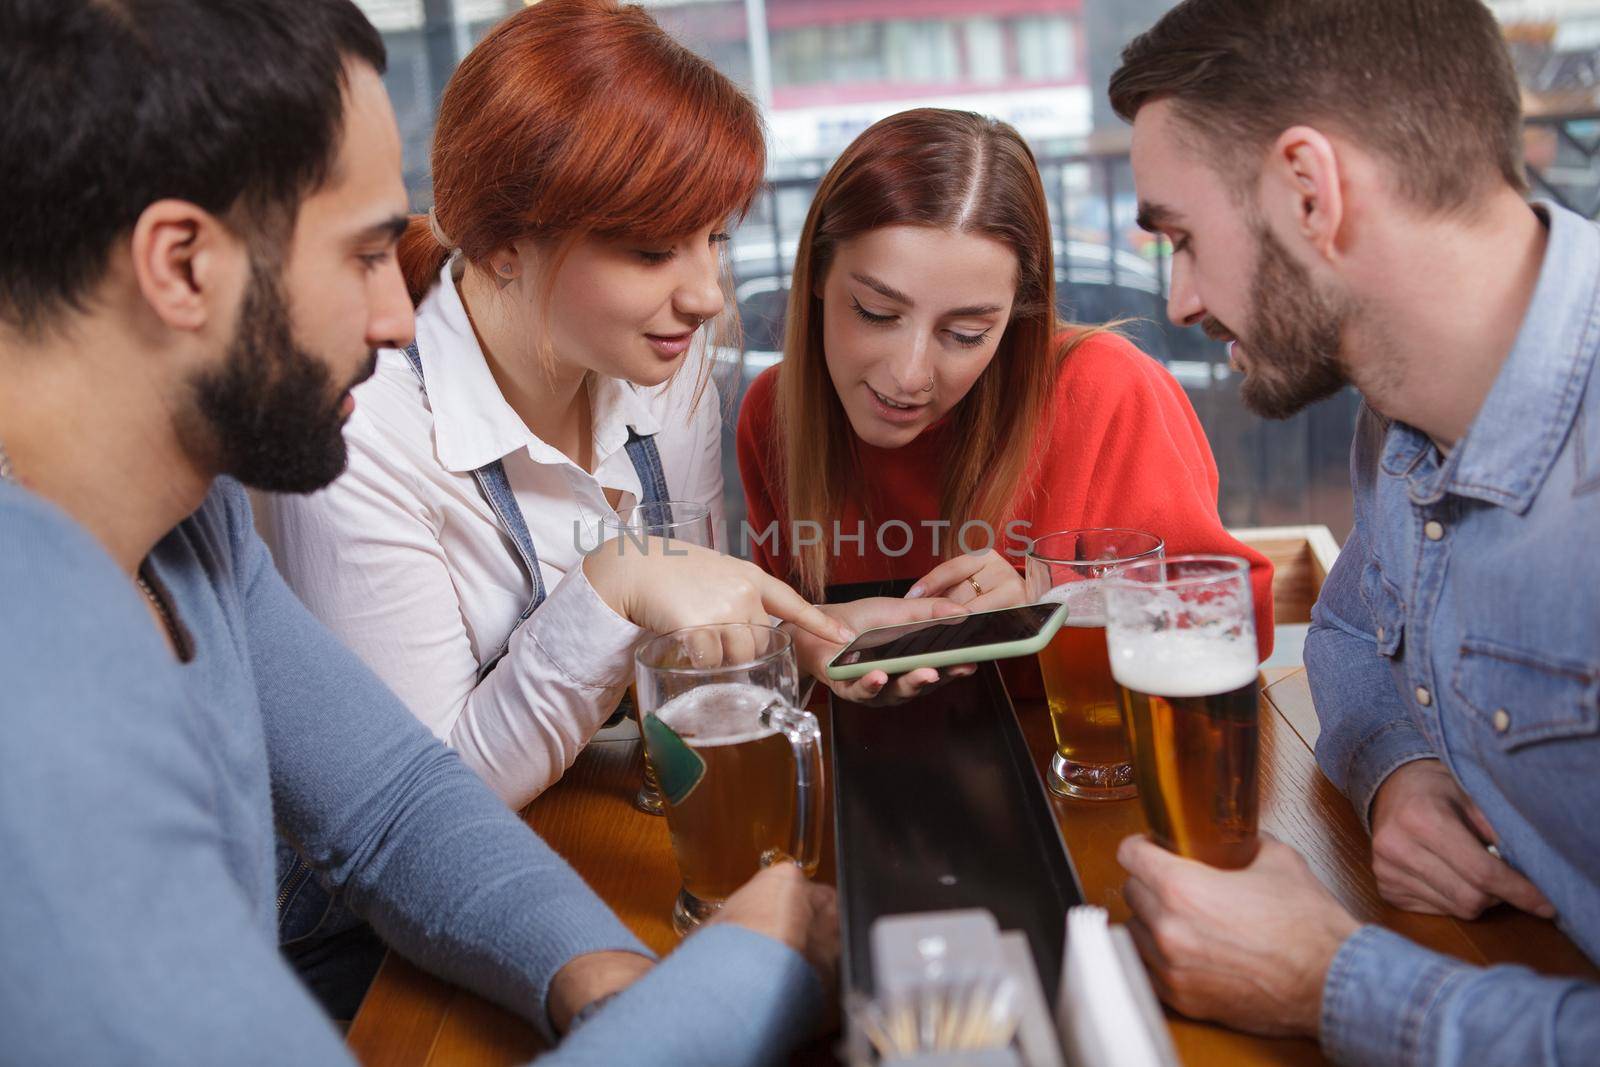 Group of friends using smart phone while drinking beer together. Young beautiful woman showing something online to her friends, using her phone